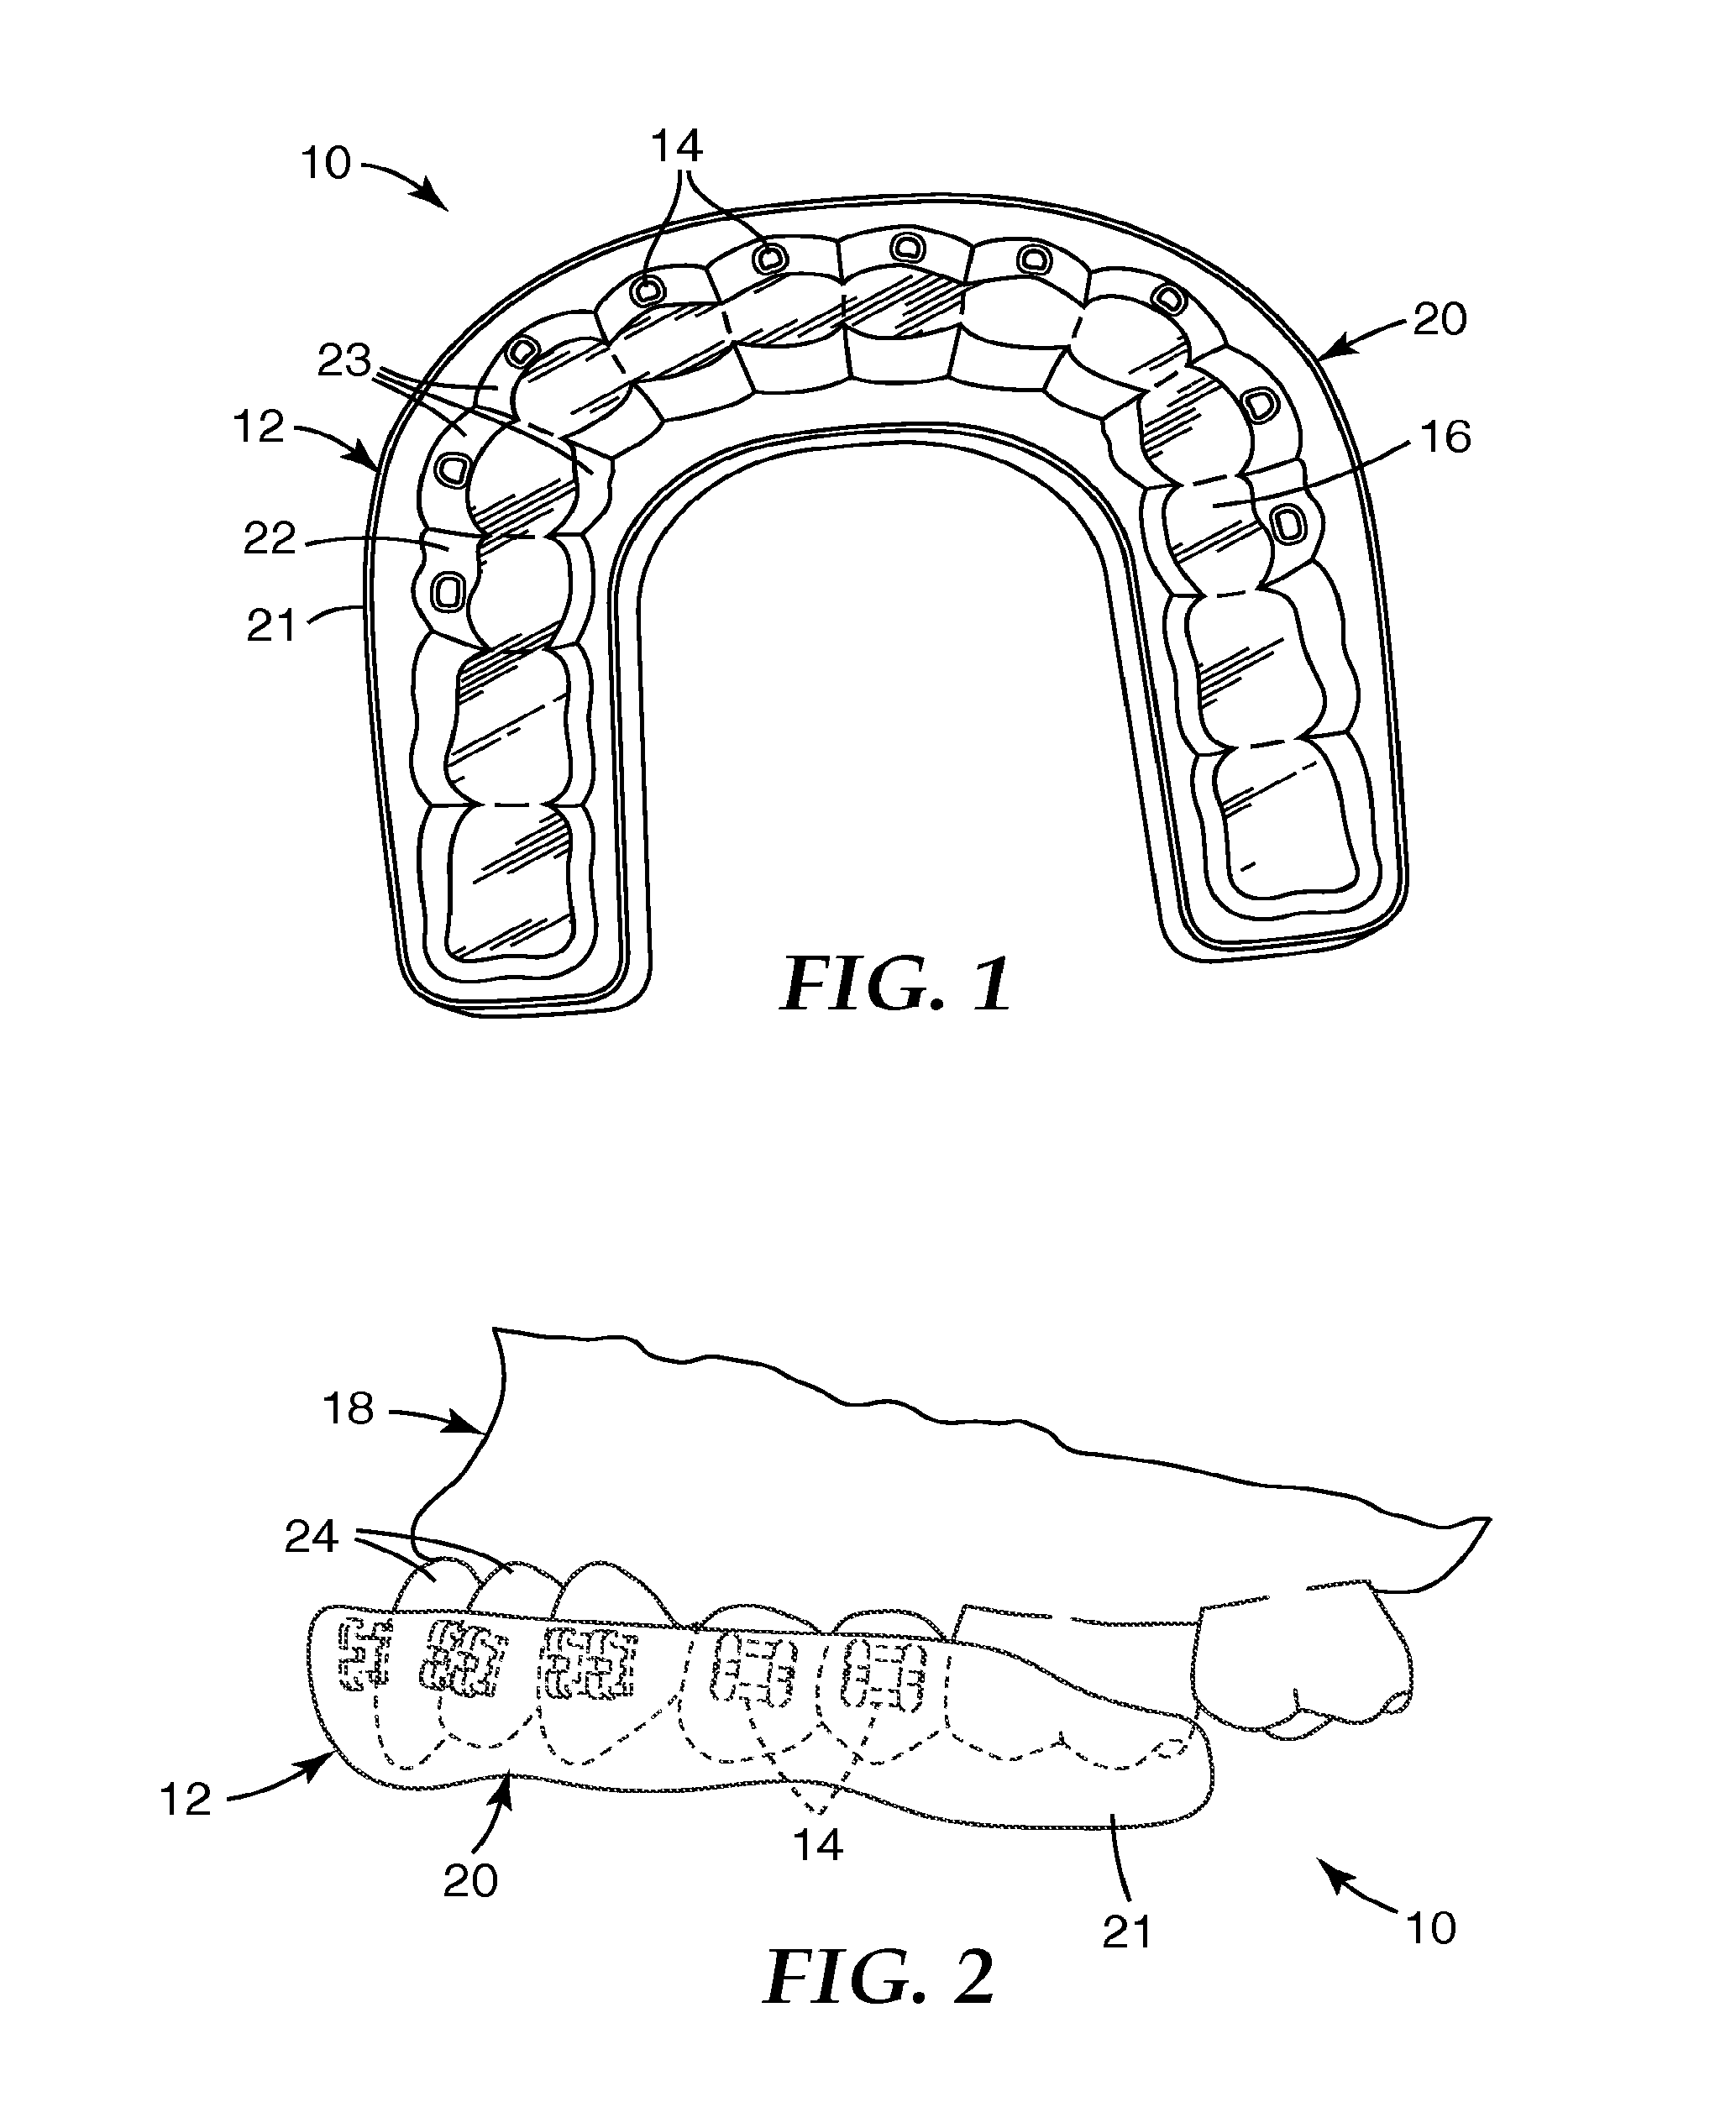 Methods and apparatus for applying dental sealant to an orthodontic patient's teeth